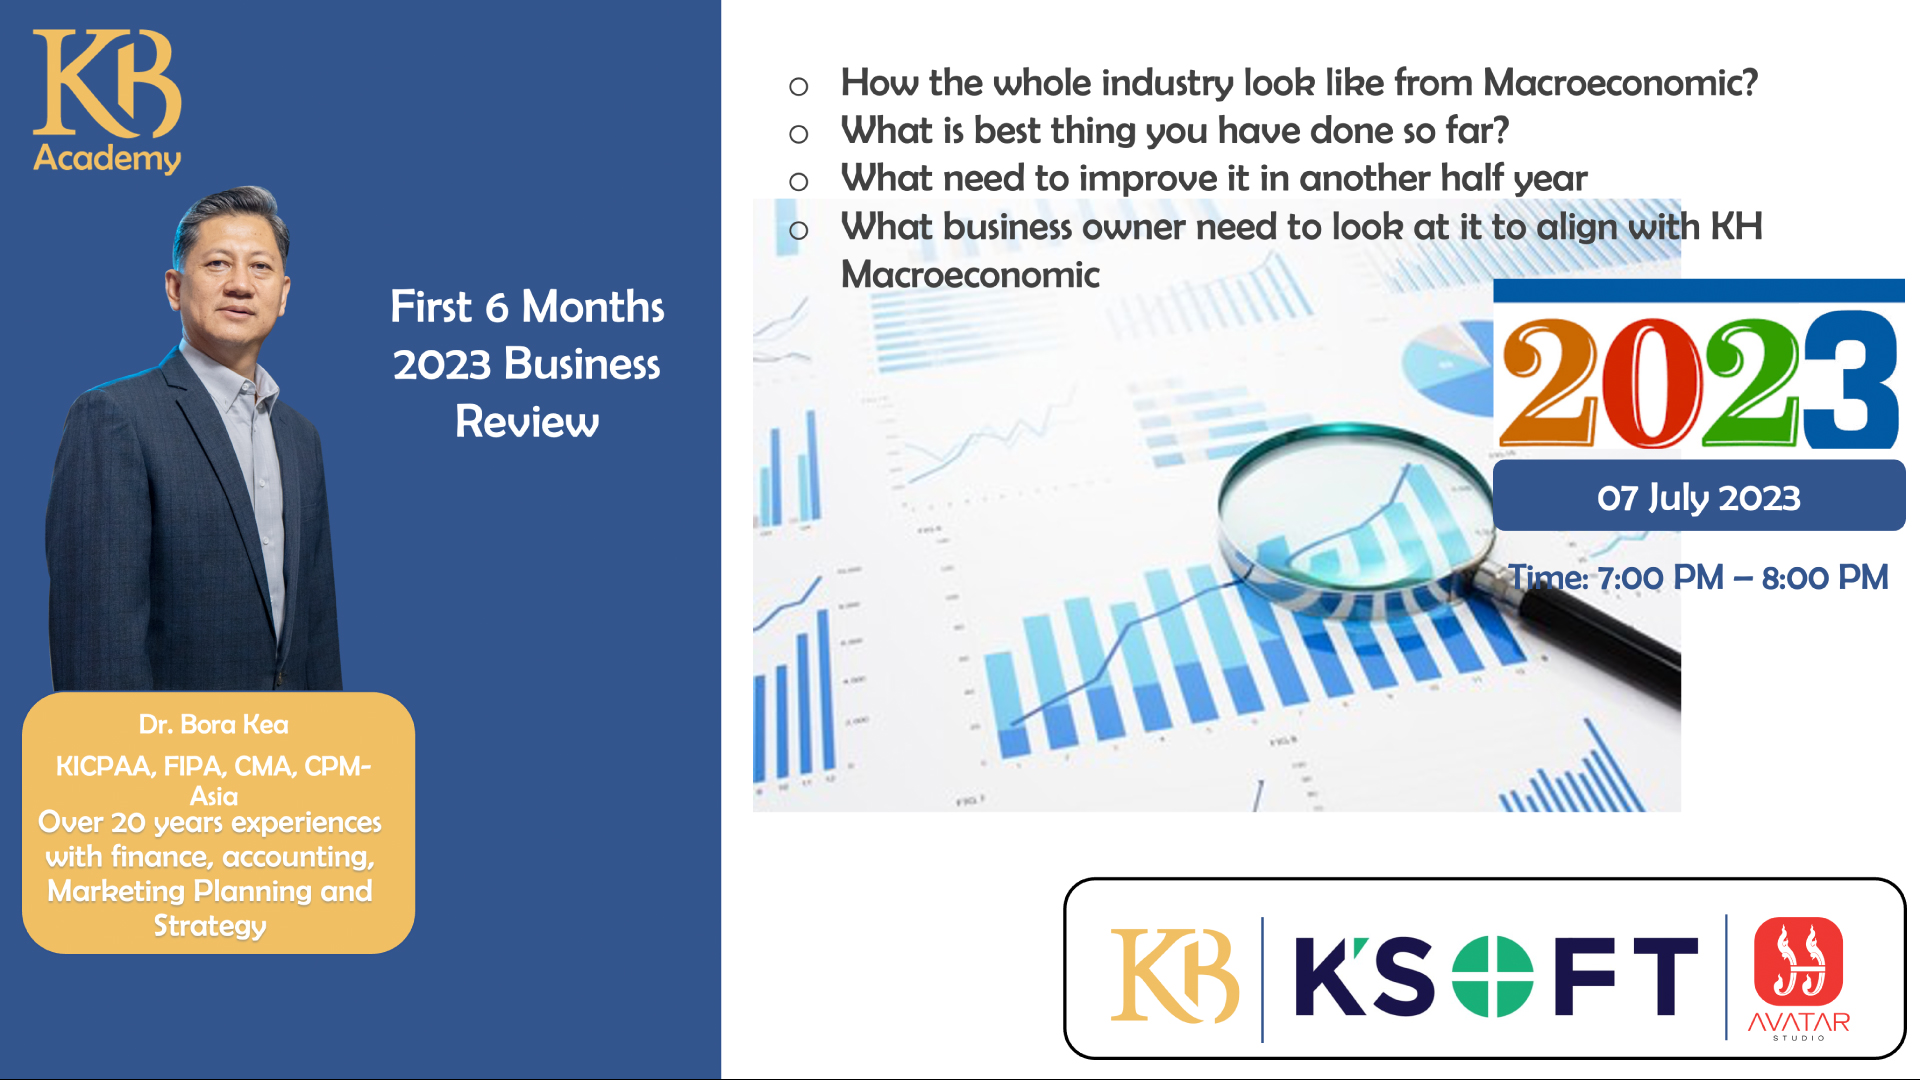 First 6 Months 2023 Business Review